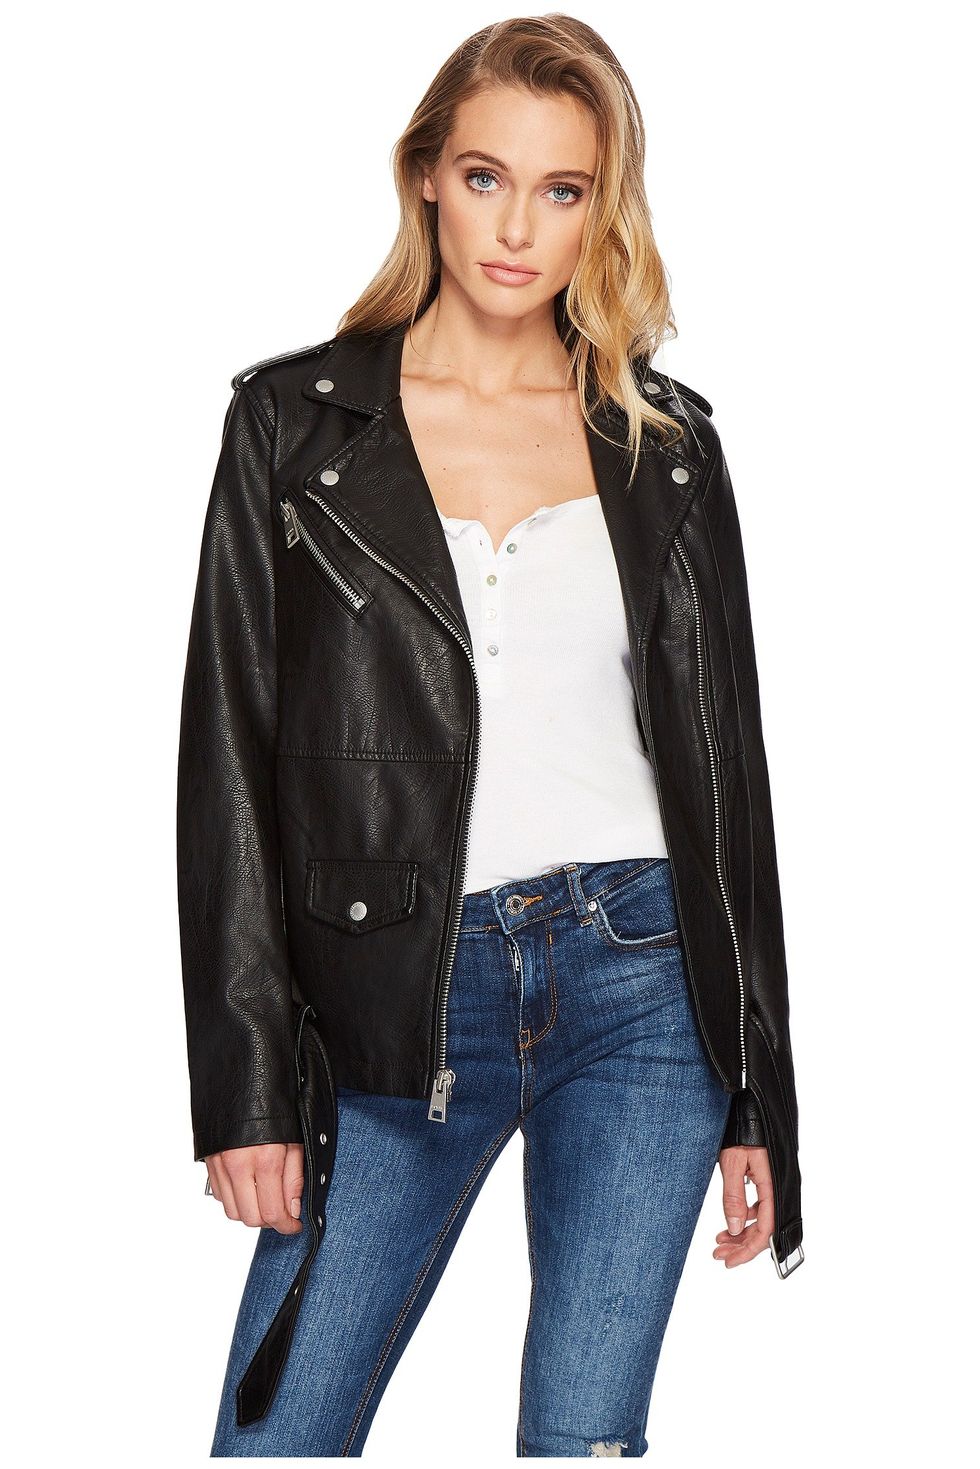 10 Leather Jacket Outfit Ideas for Women - How to Wear a Leather Jacket